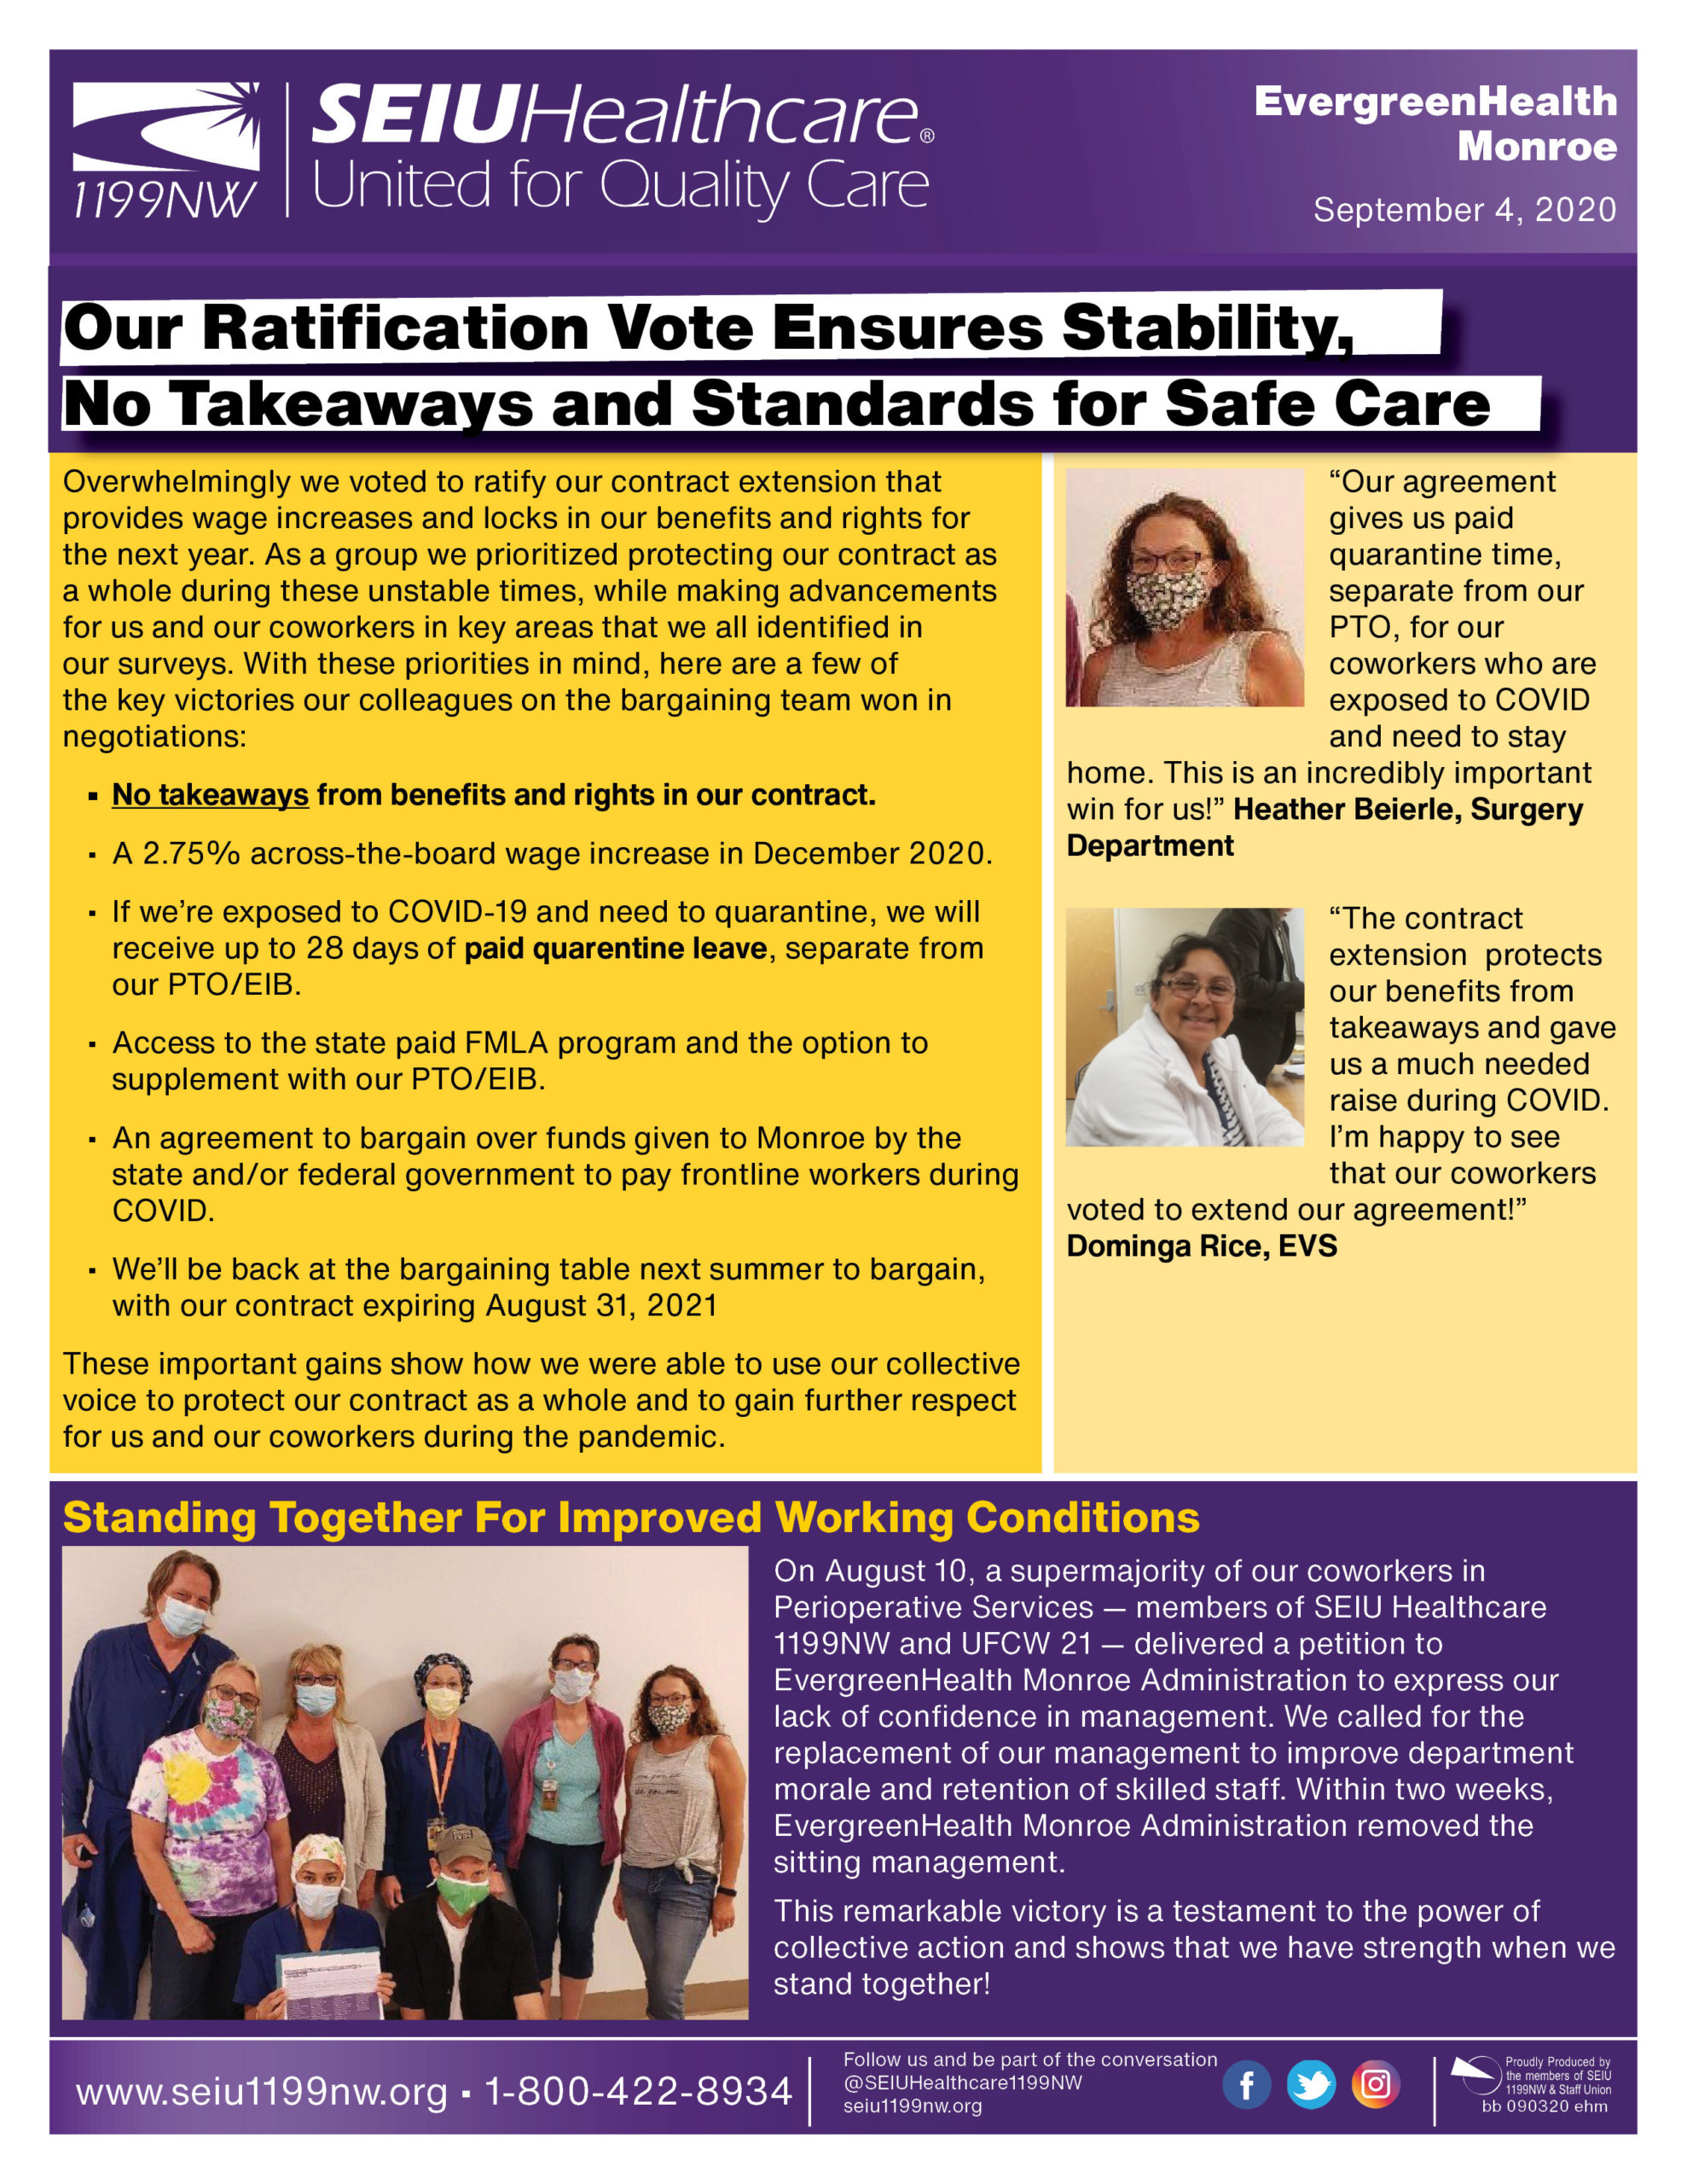 Our Ratification Vote Ensures Stability, No Takeaways and Standards for Safe Care